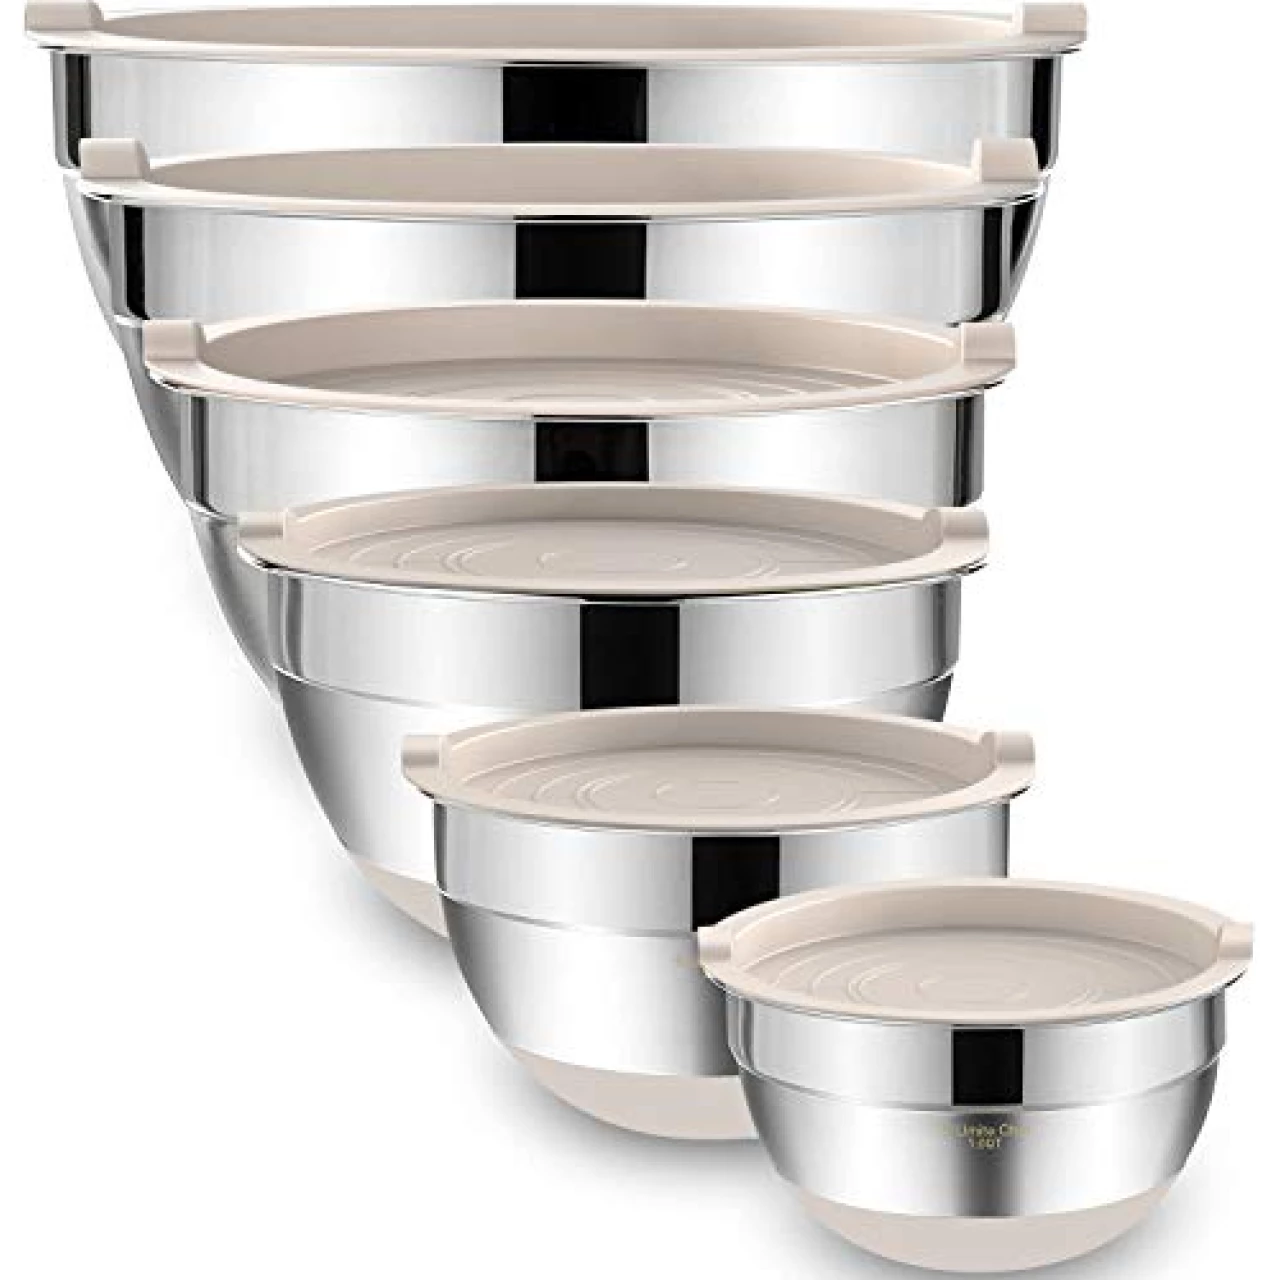 Umite Chef Mixing Bowls with Airtight Lids, 6 piece Stainless Steel Metal Nesting Storage Bowls, Non-Slip Bottoms